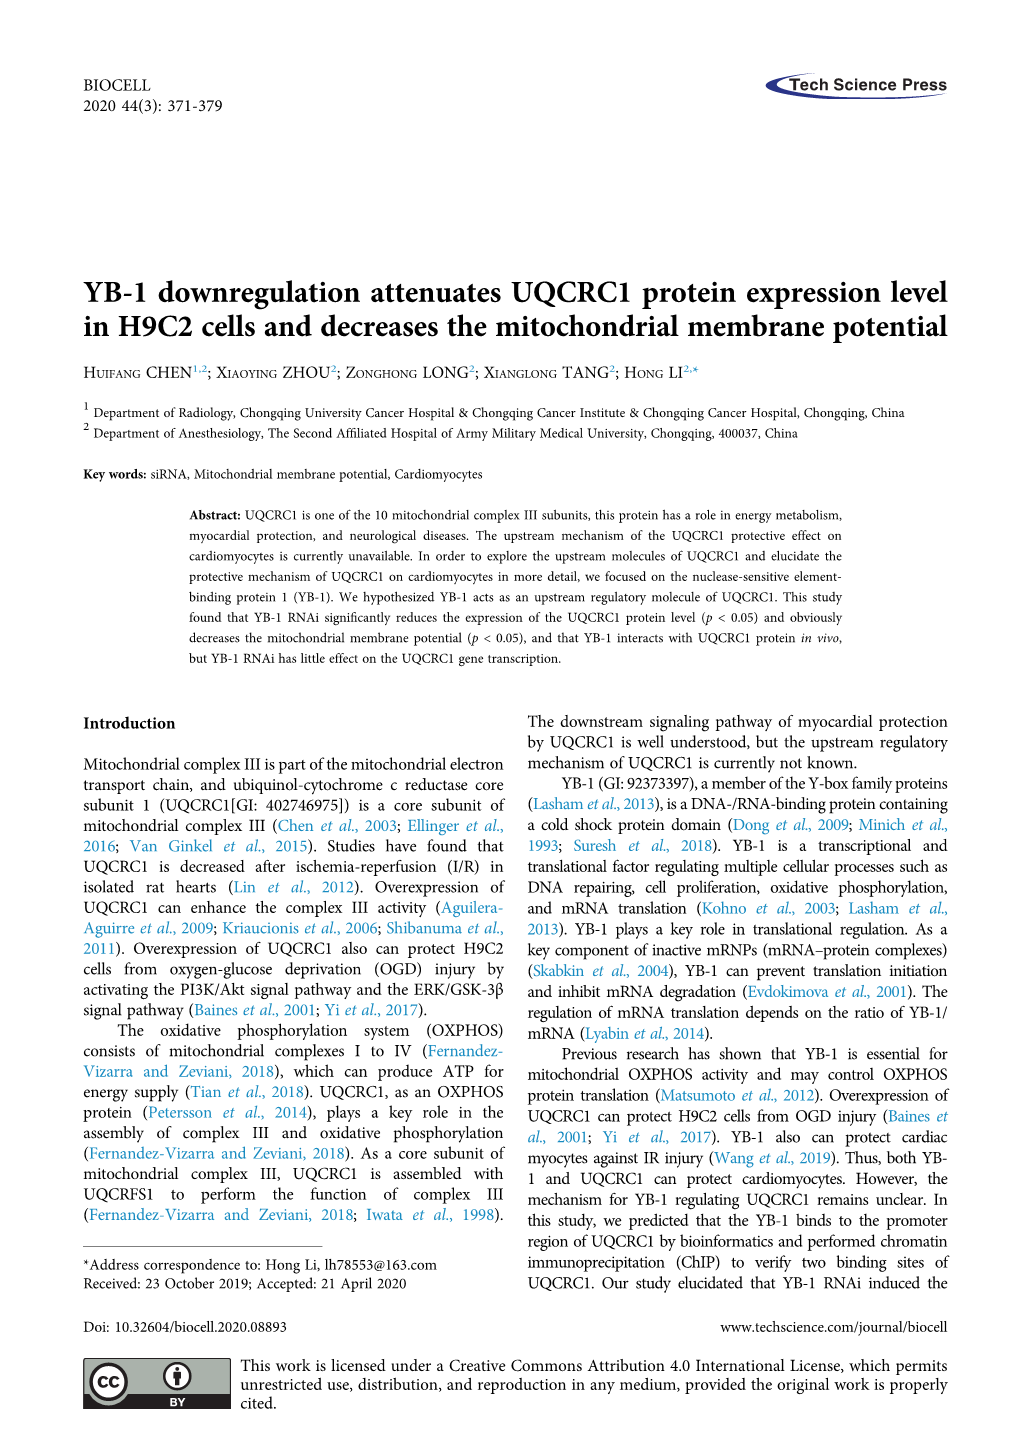 YB-1 Downregulation Attenuates UQCRC1 Protein Expression Level in H9C2 Cells and Decreases the Mitochondrial Membrane Potential